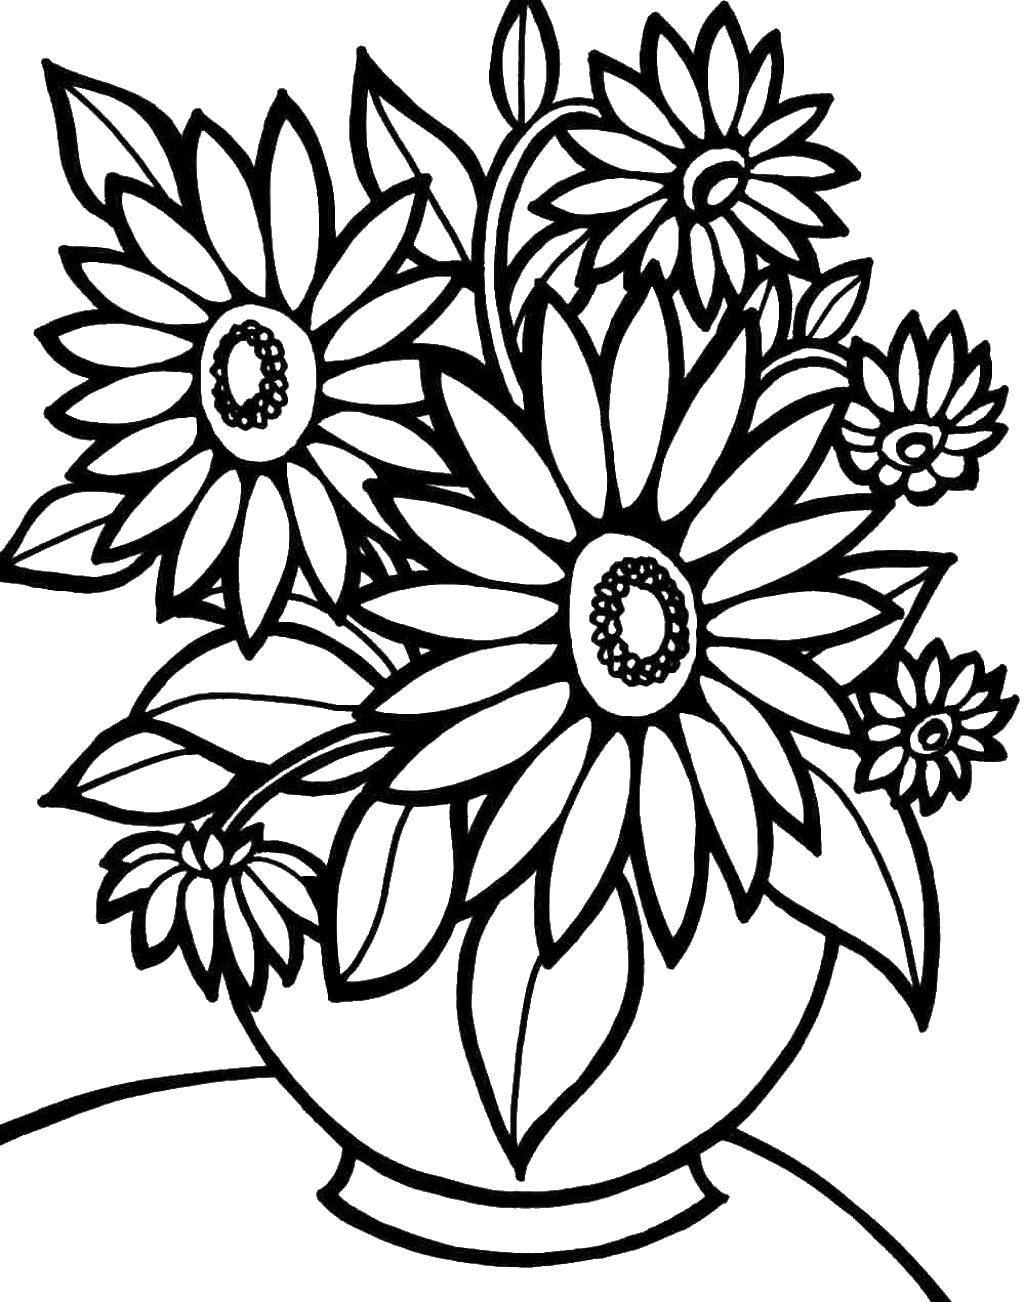 Coloring Flowers in a vase. Category flowers. Tags:  flowers, bouquet, vase.